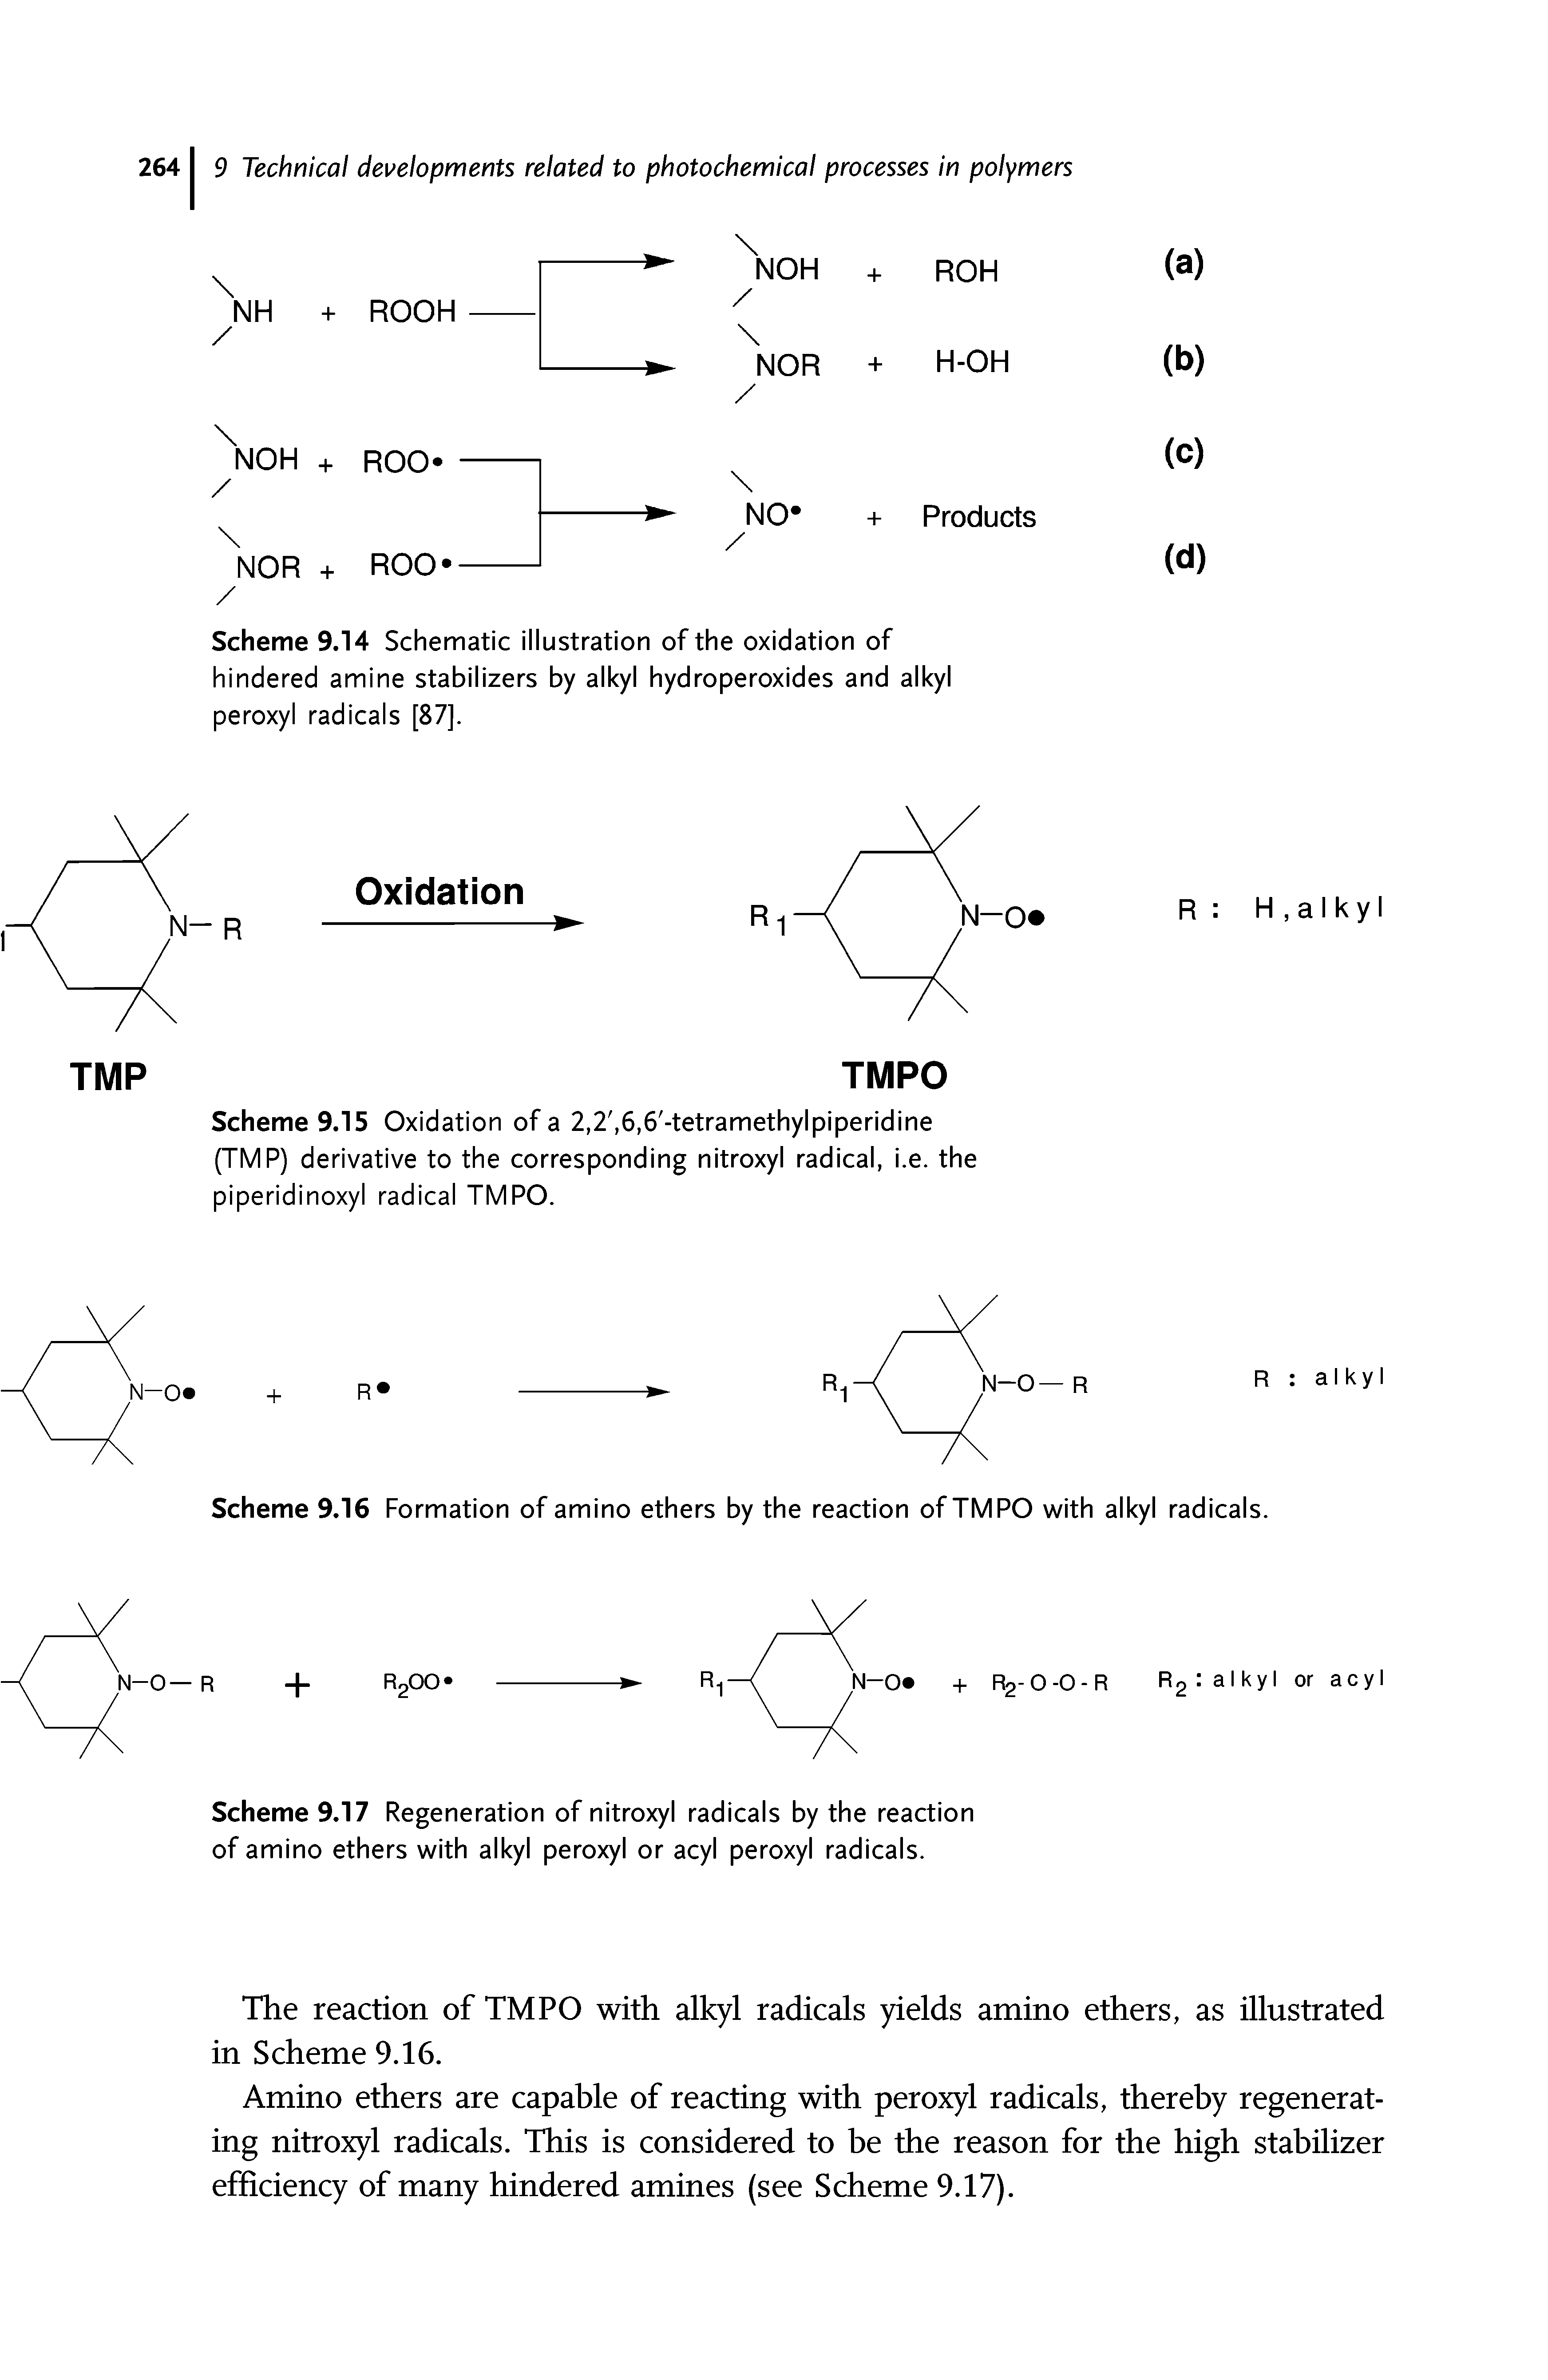 Scheme 9.16 Formation of amino ethers by the reaction of TMPO with alkyl radicals.